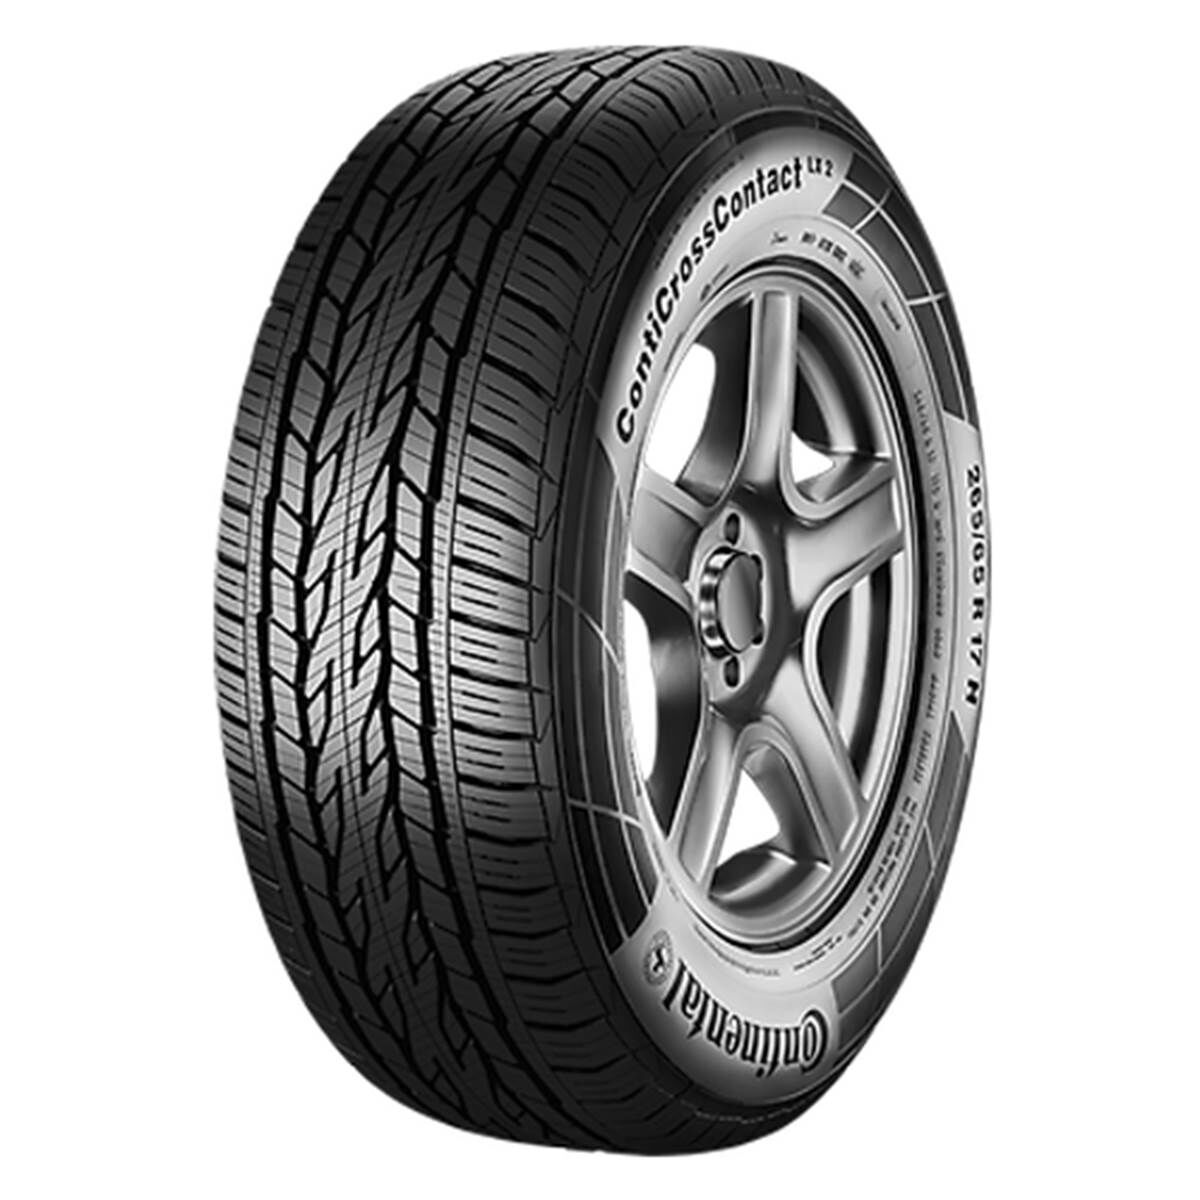 CONTINENTAL Neumático  CONTICROSSCONTACT LX 2 235/75R15 109T